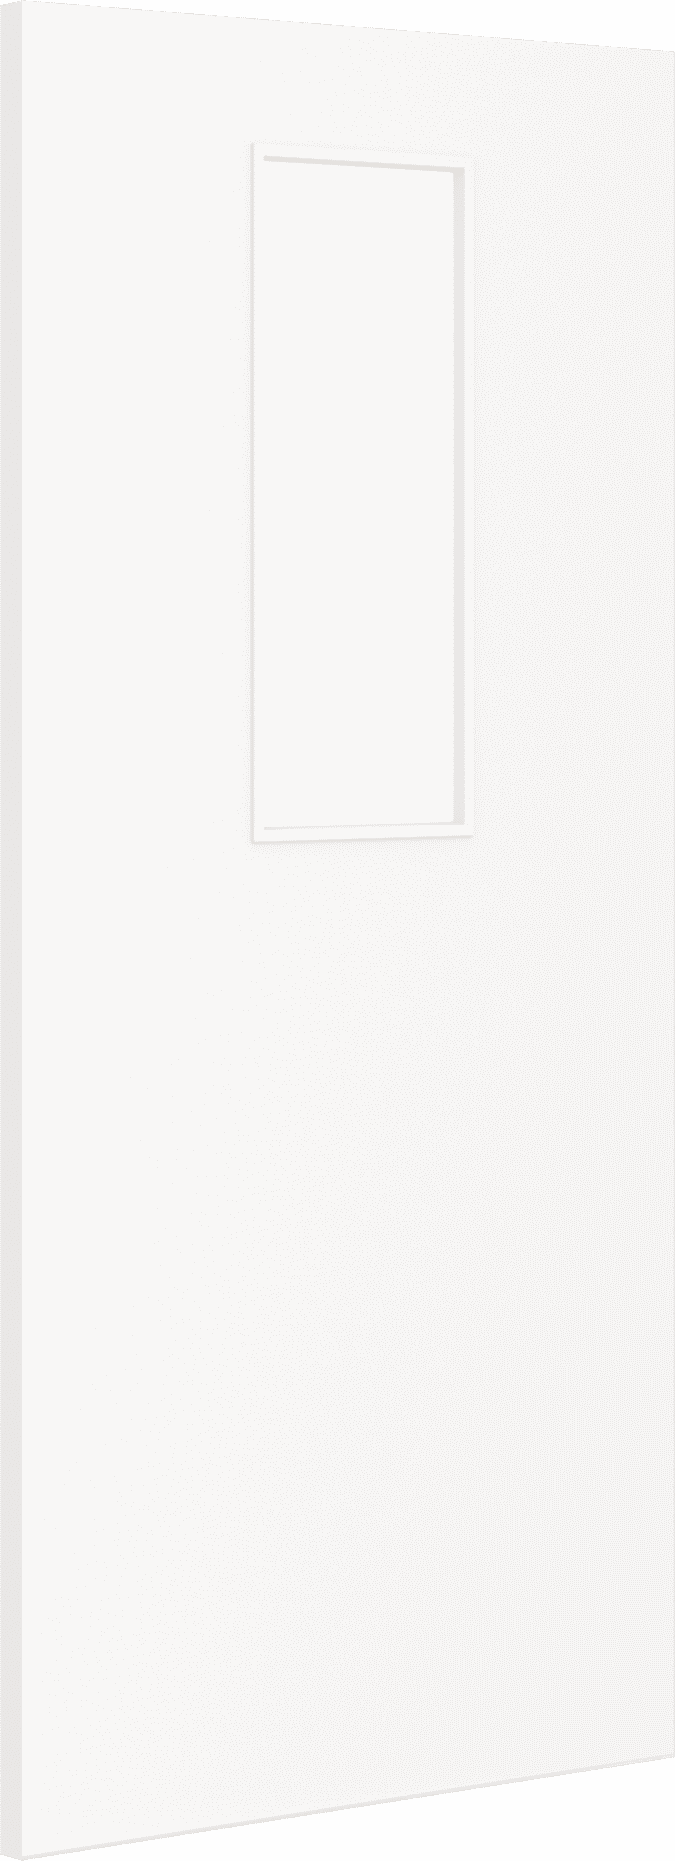 1981mm x 533mm x 44mm (21") Architectural Paint Grade White 14 Clear Glazed Fire Door Blank